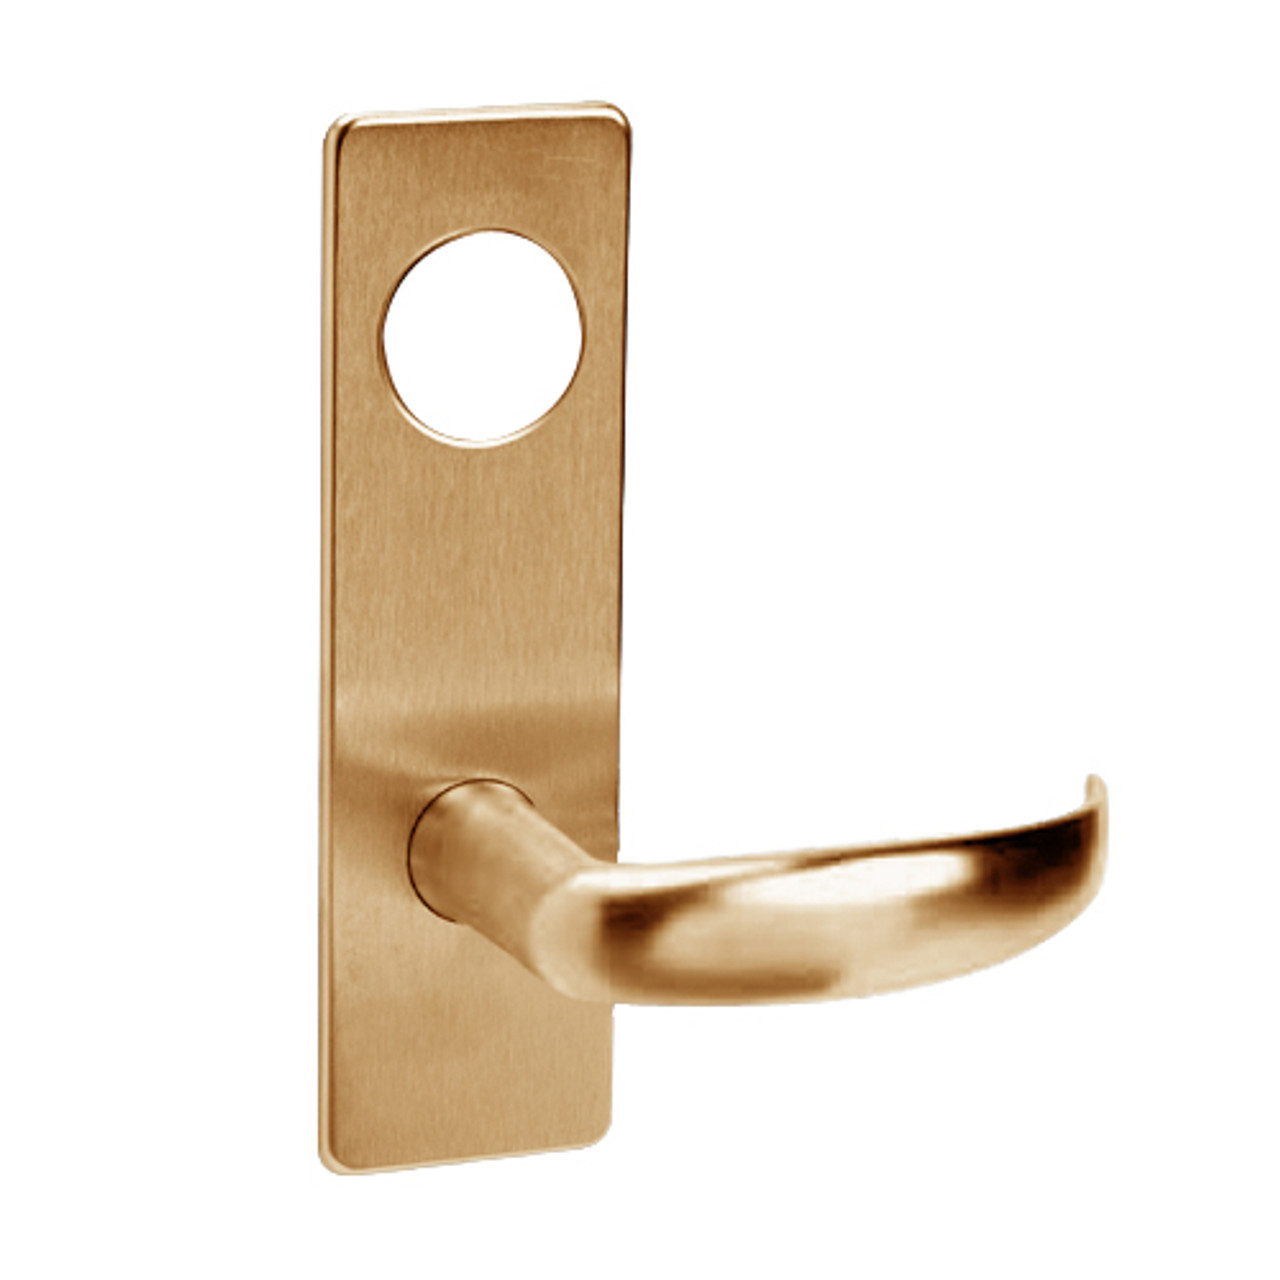 ML2051-PSR-612-M31 Corbin Russwin ML2000 Series Mortise Office Trim Pack with Princeton Lever in Satin Bronze